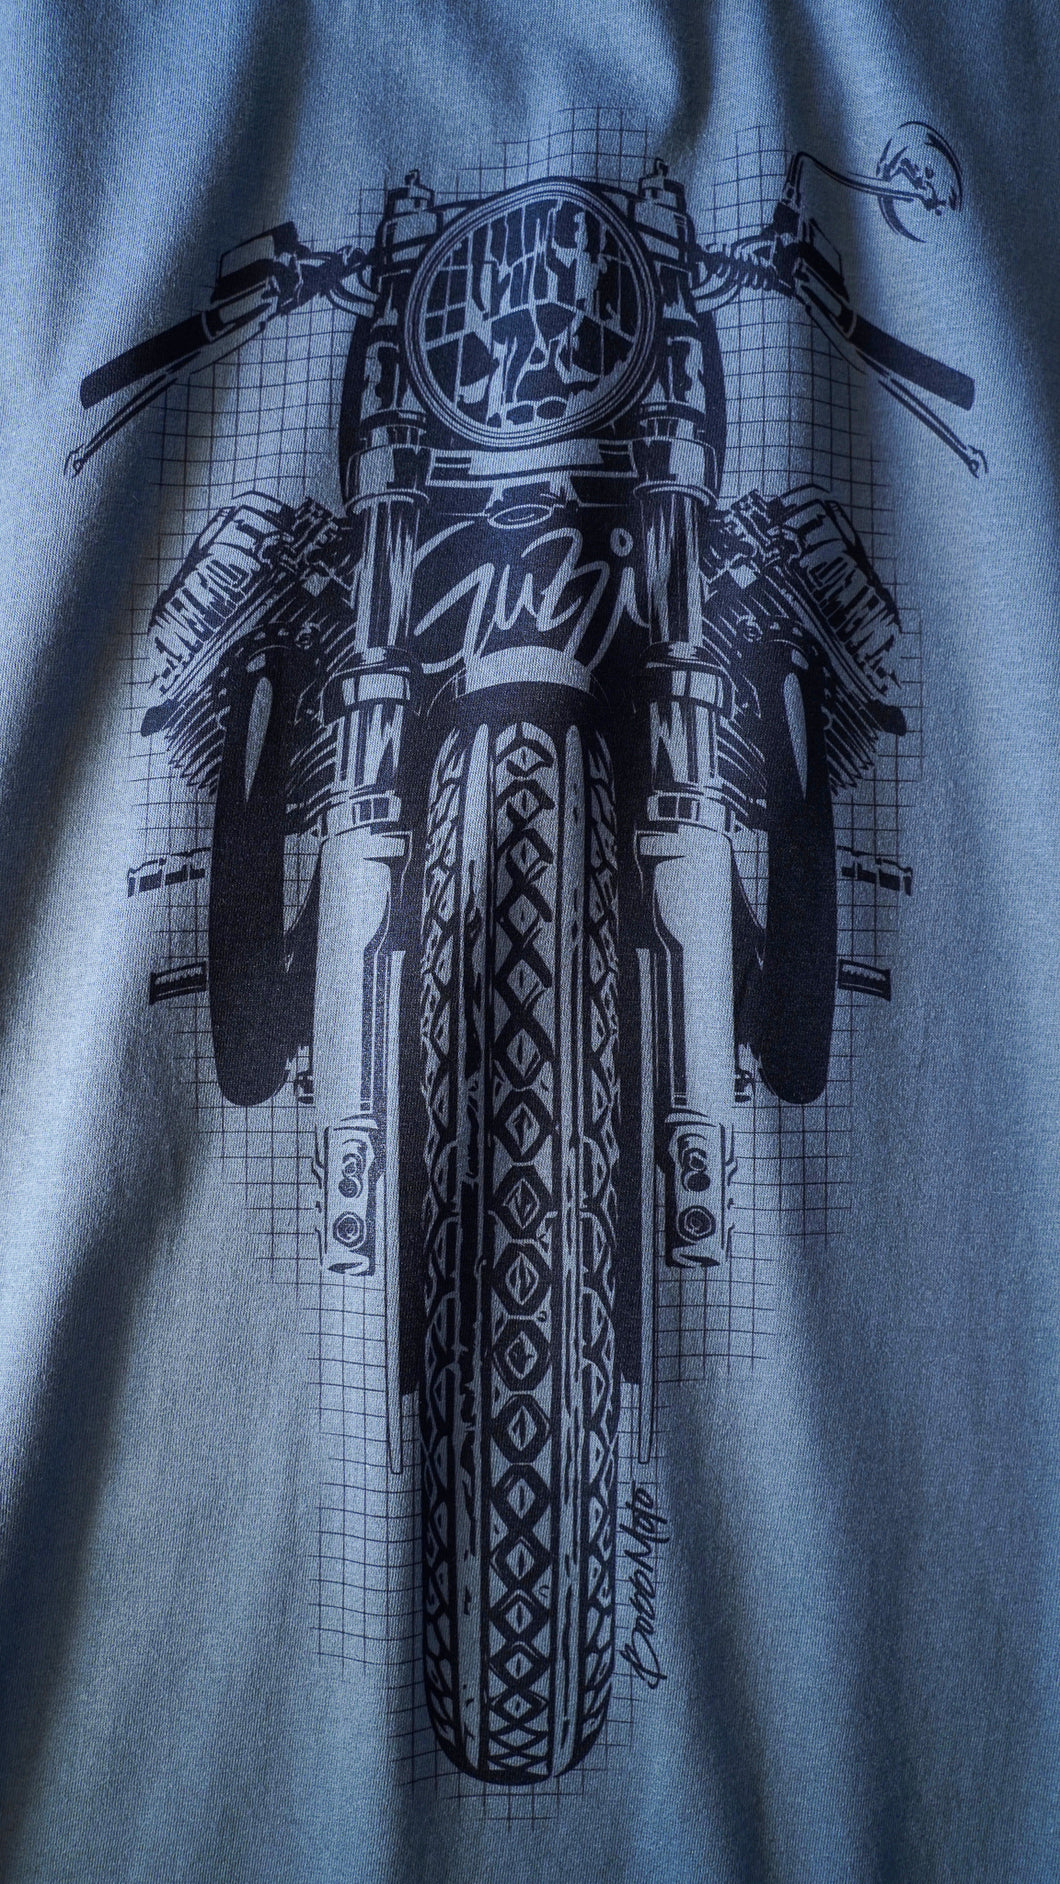 Blue and Black Motorcycle Shirt: How to Get & Information